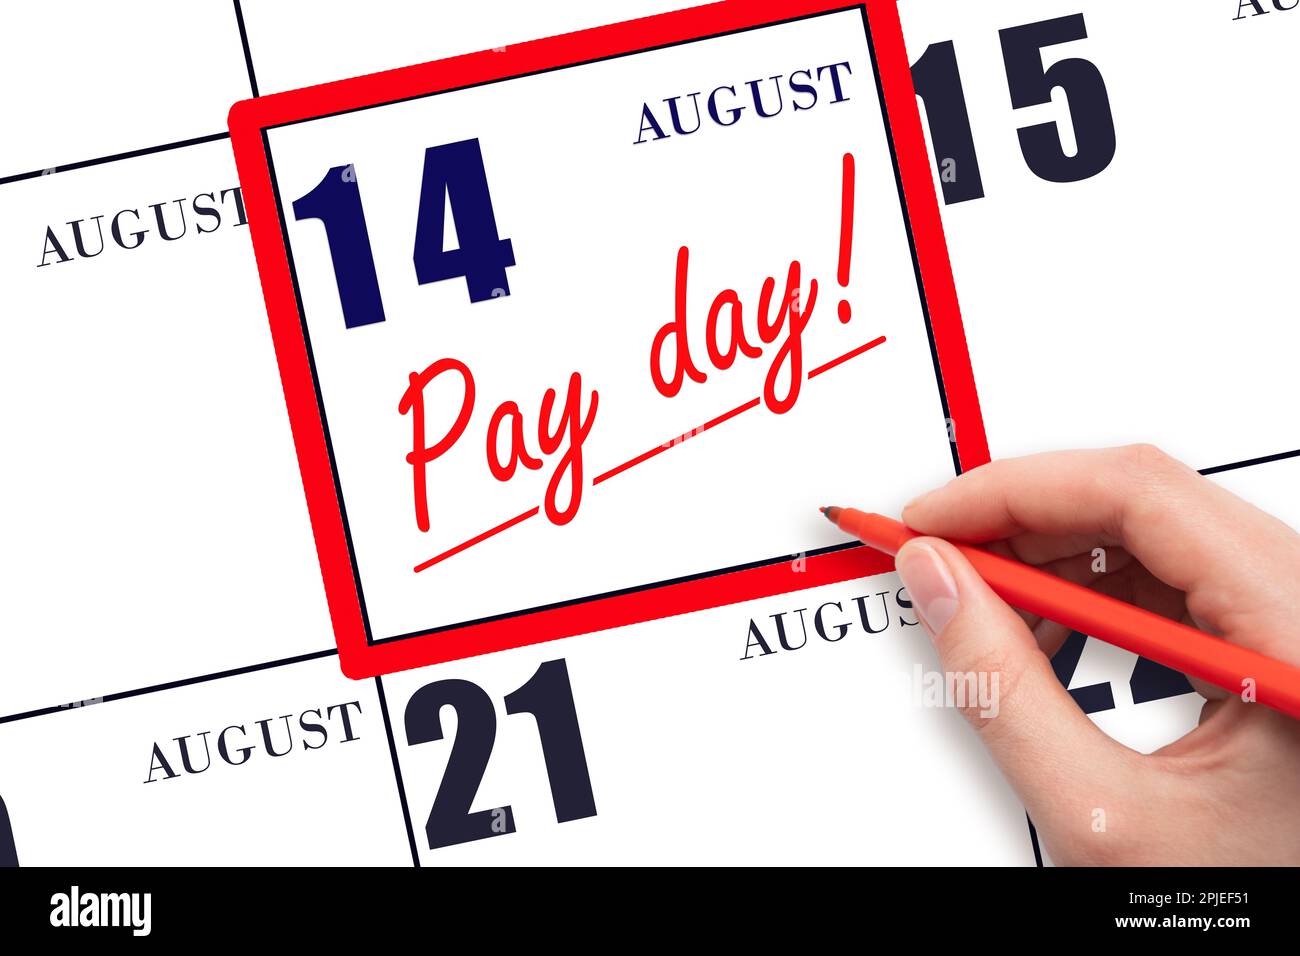 14th day of August. Hand writing text PAY DATE on calendar date August 14 and underline it. Payment due date.  Reminder concept of payment. Summer mon Stock Photo